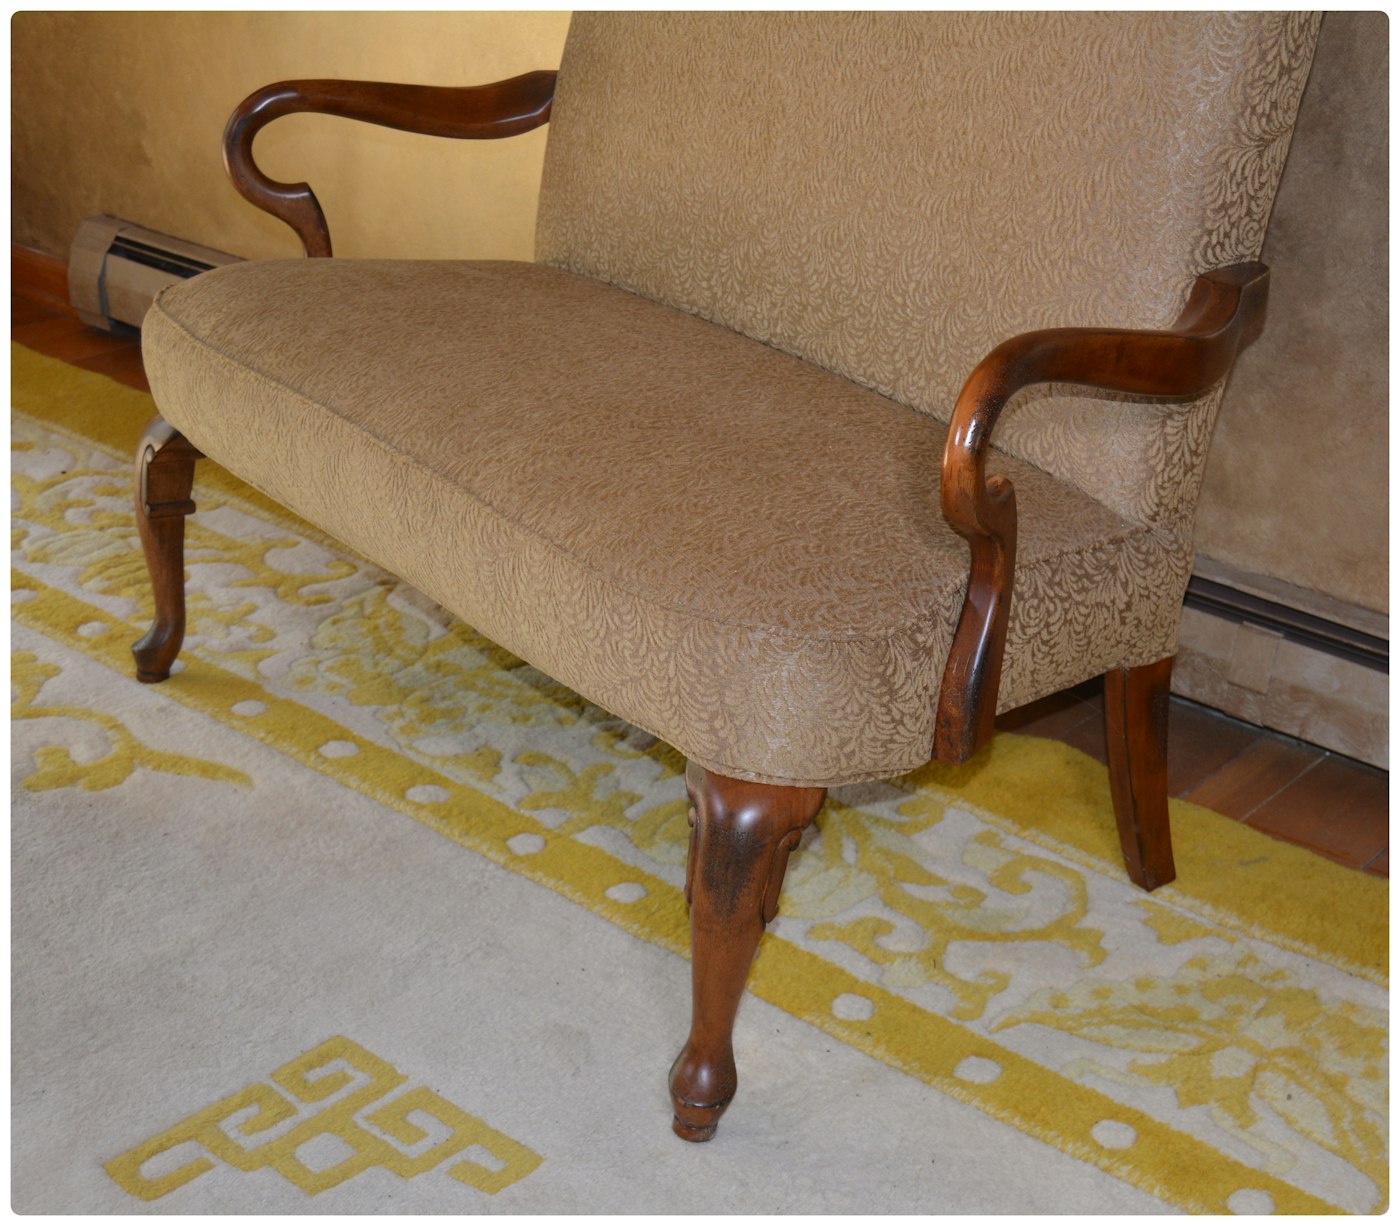 Upholstered Best Chairs, Inc Federal Style Wooden Settee, 20th Century